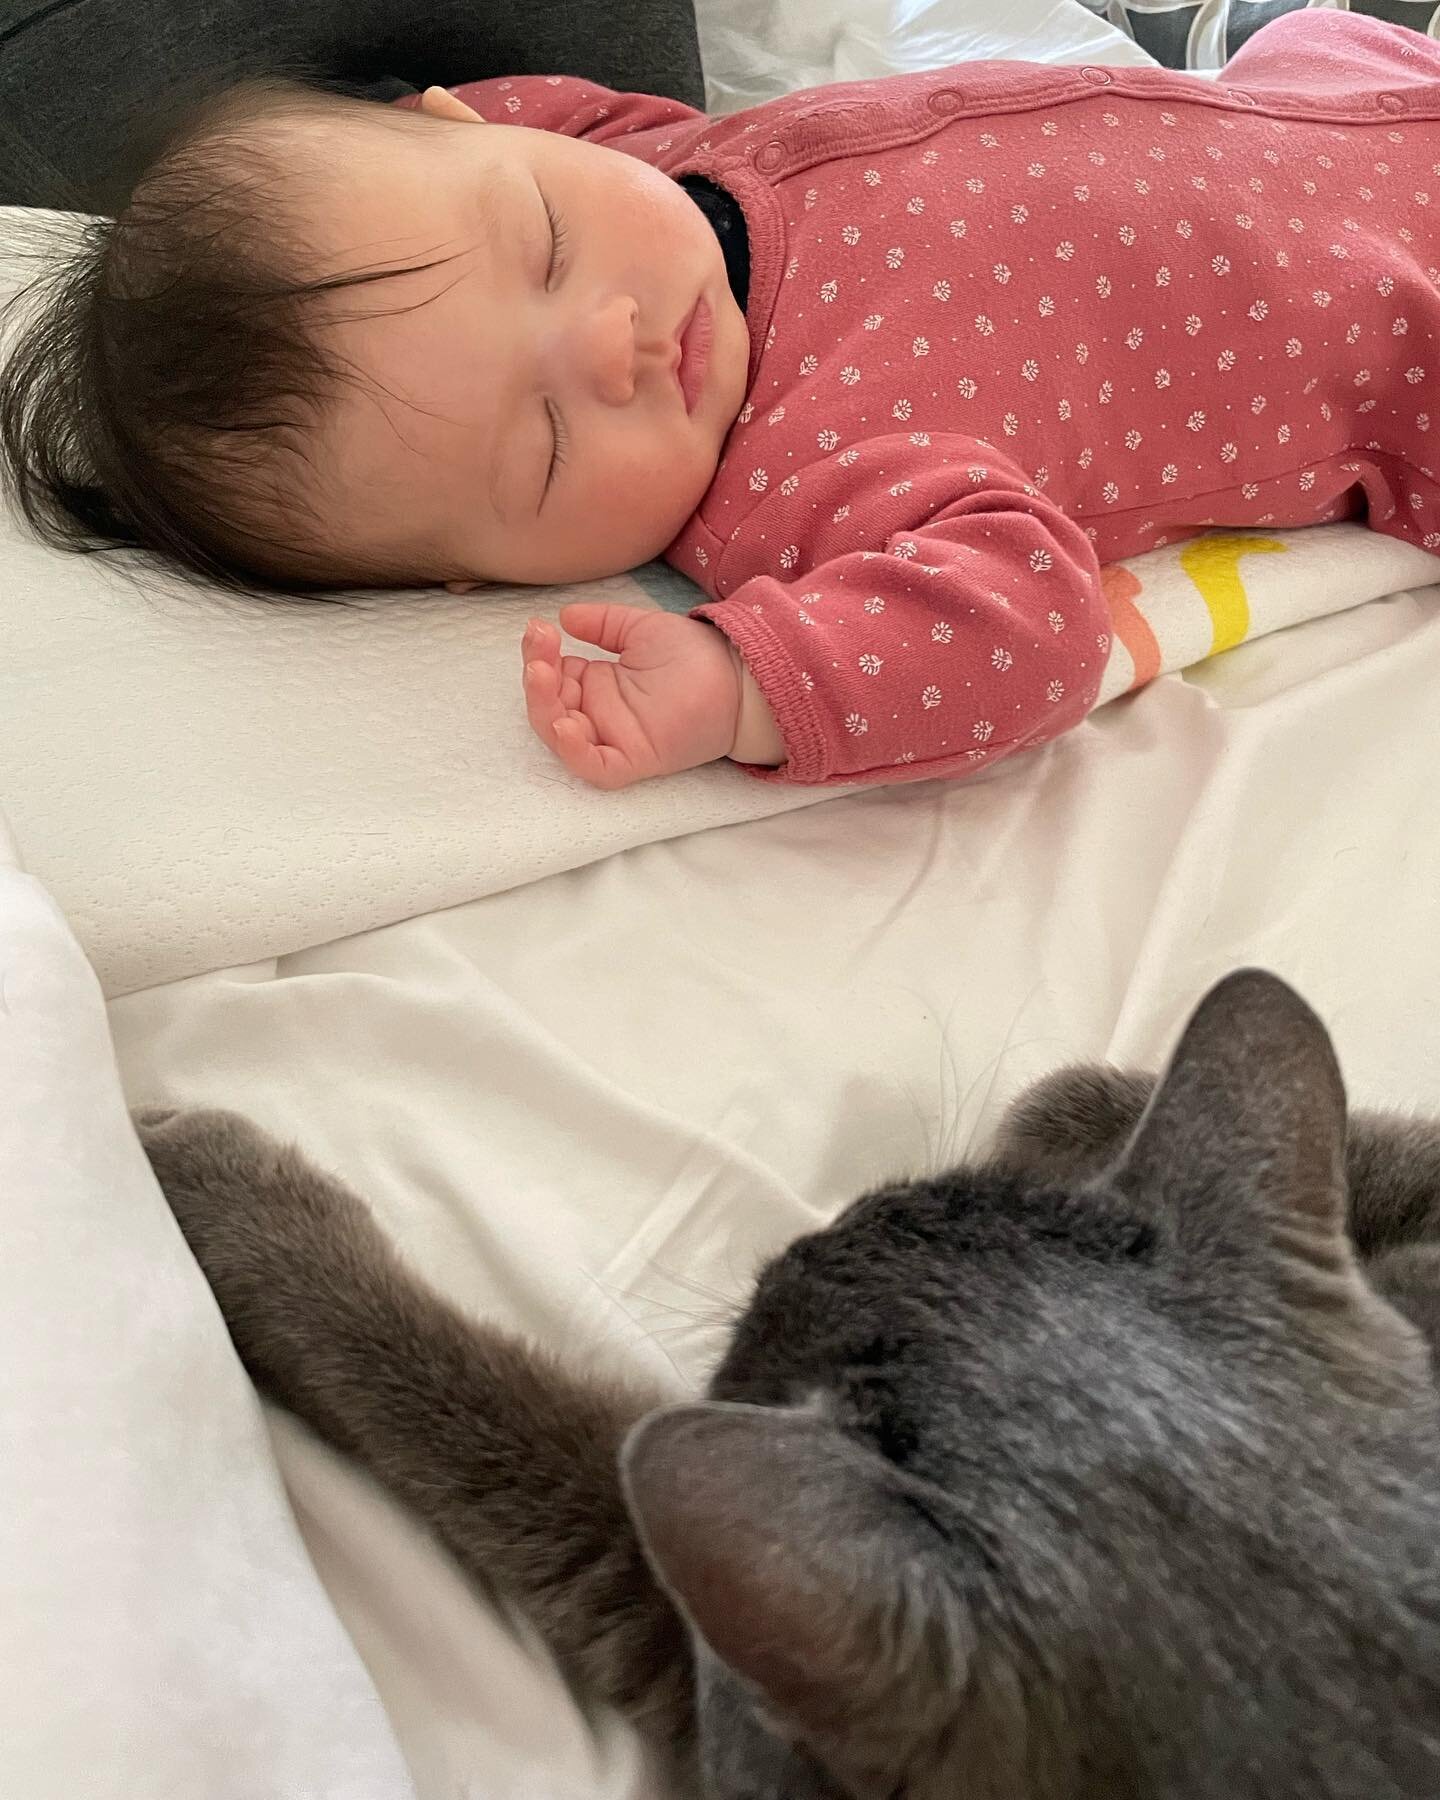 A budding friendship is growing between these two. 🥰🥰